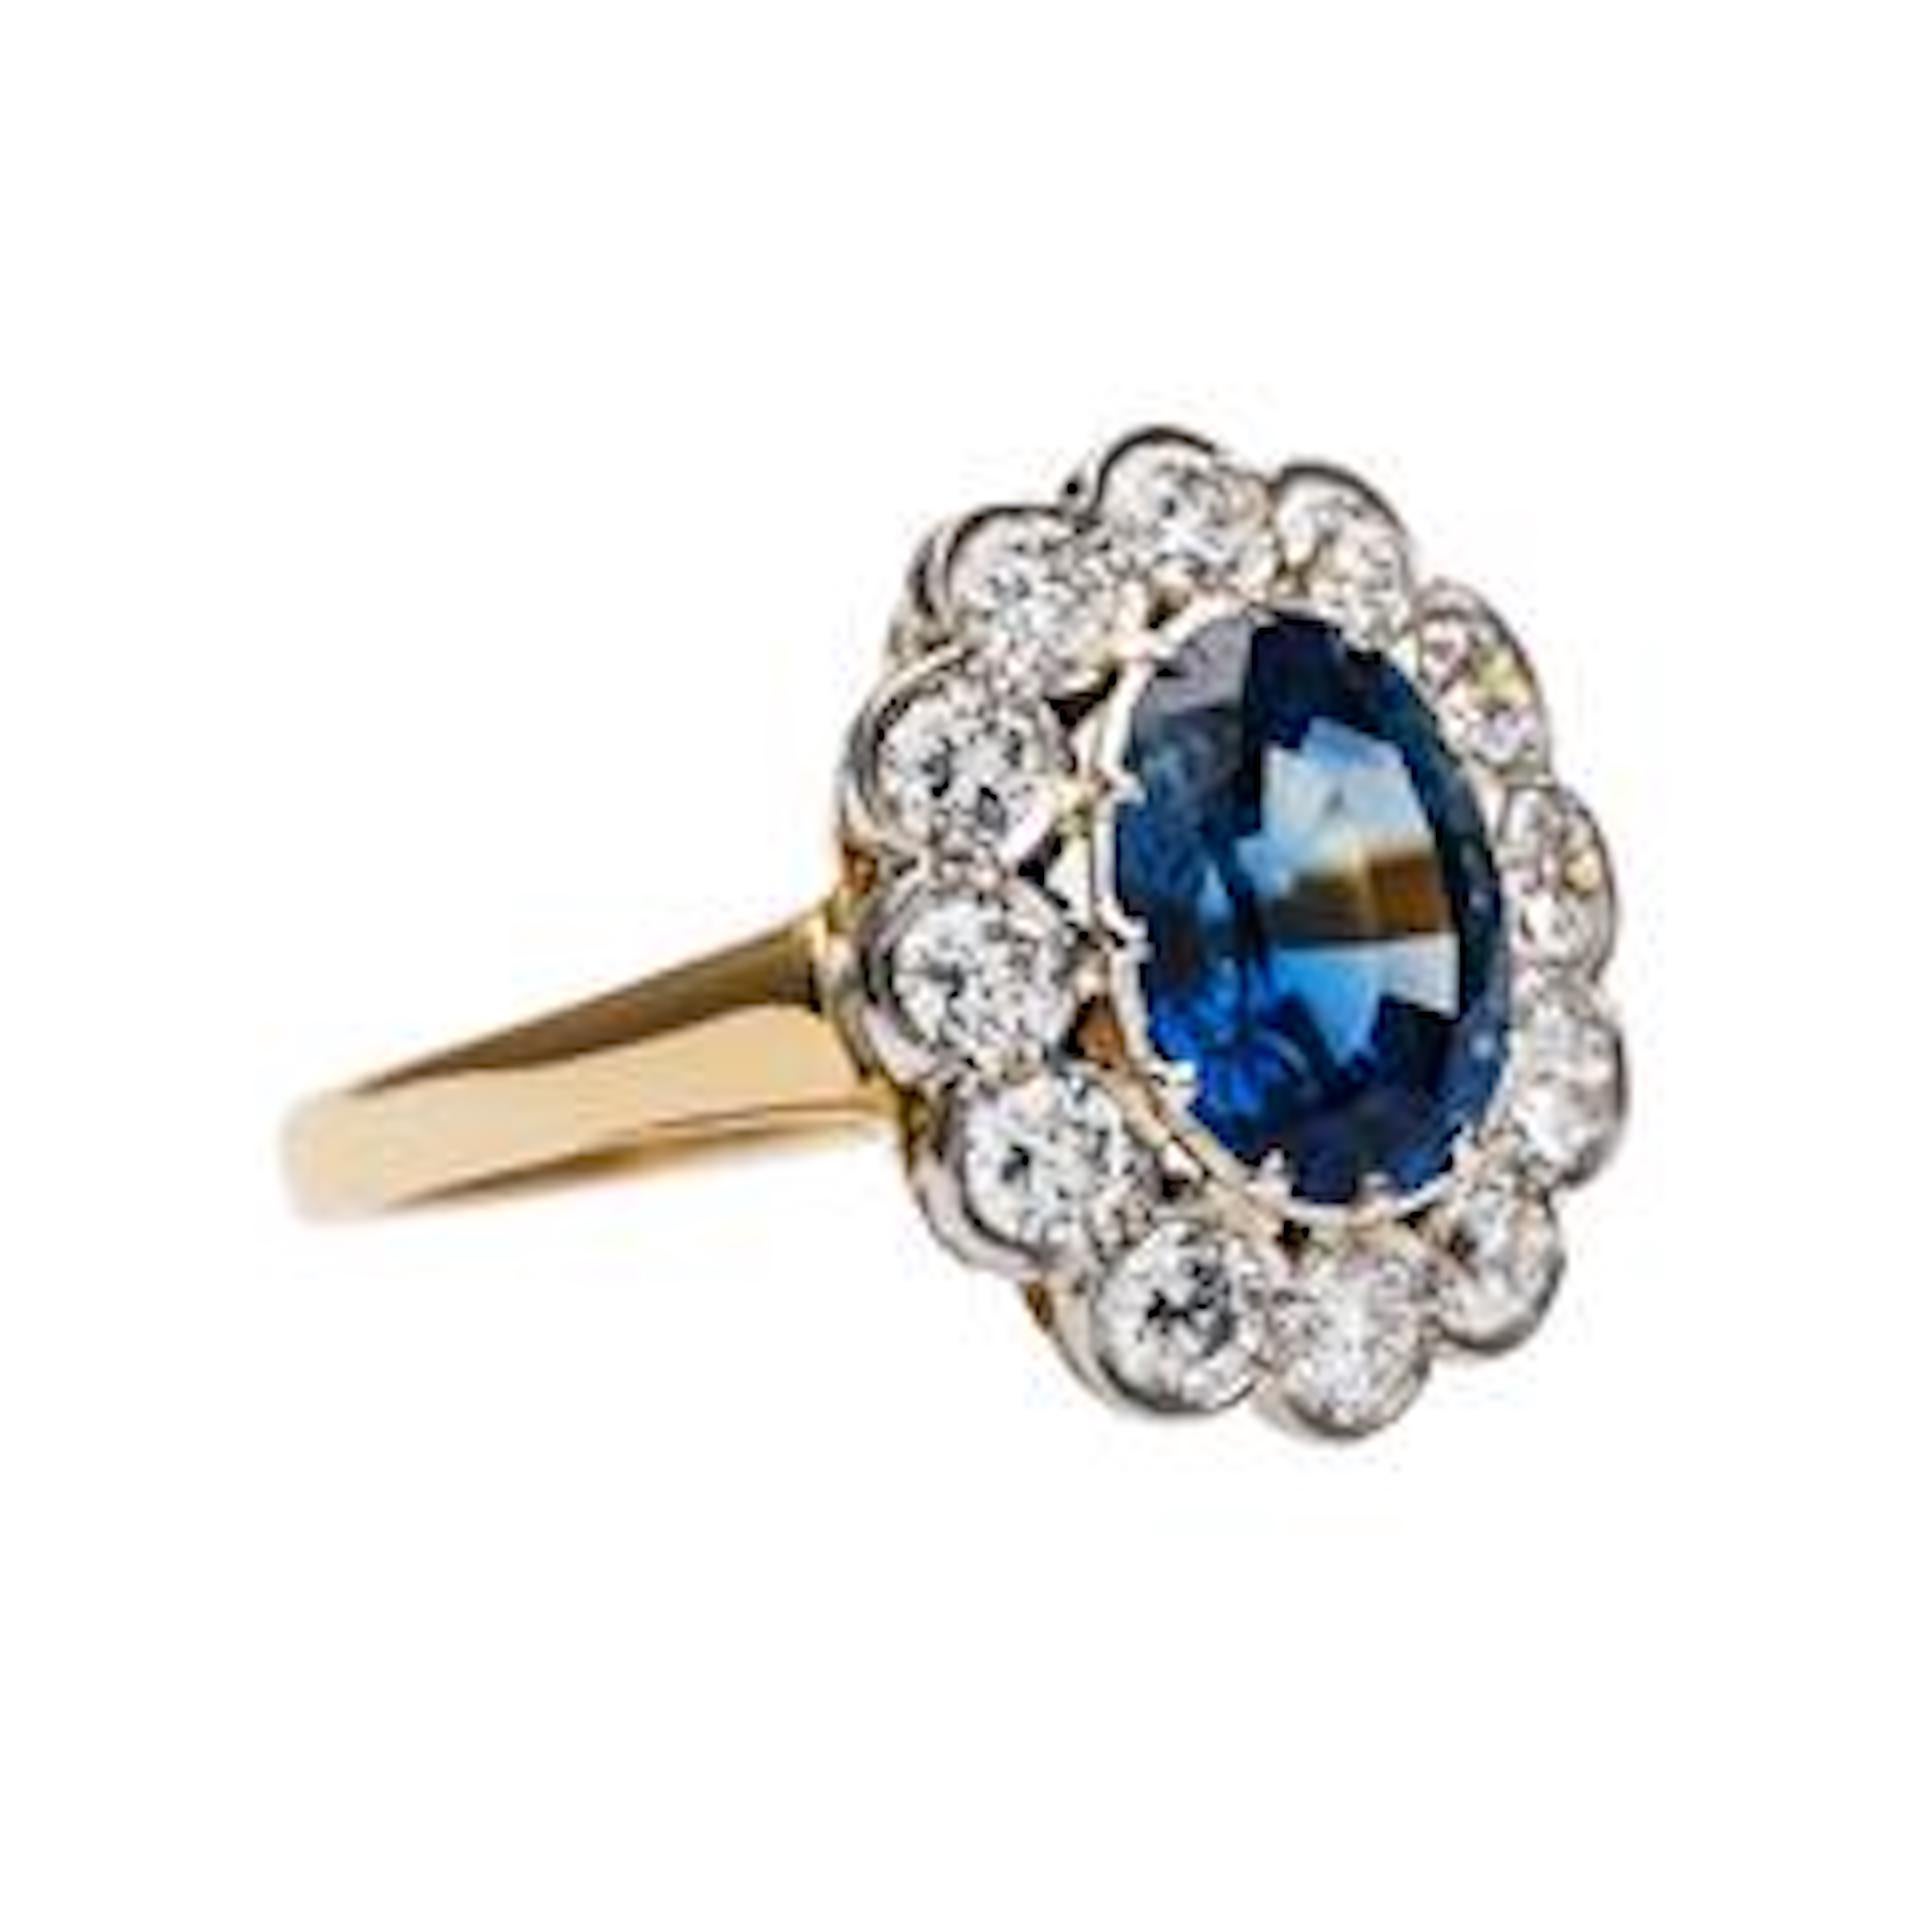 Pondera is a magnificent handcrafted ring designed by Trumpet & Horn made locally in downtown Los Angeles. The platinum and 18k yellow gold ring centers a twelve-prong set Oval Mixed cut natural sapphire accompanied by a Guild Laboratories